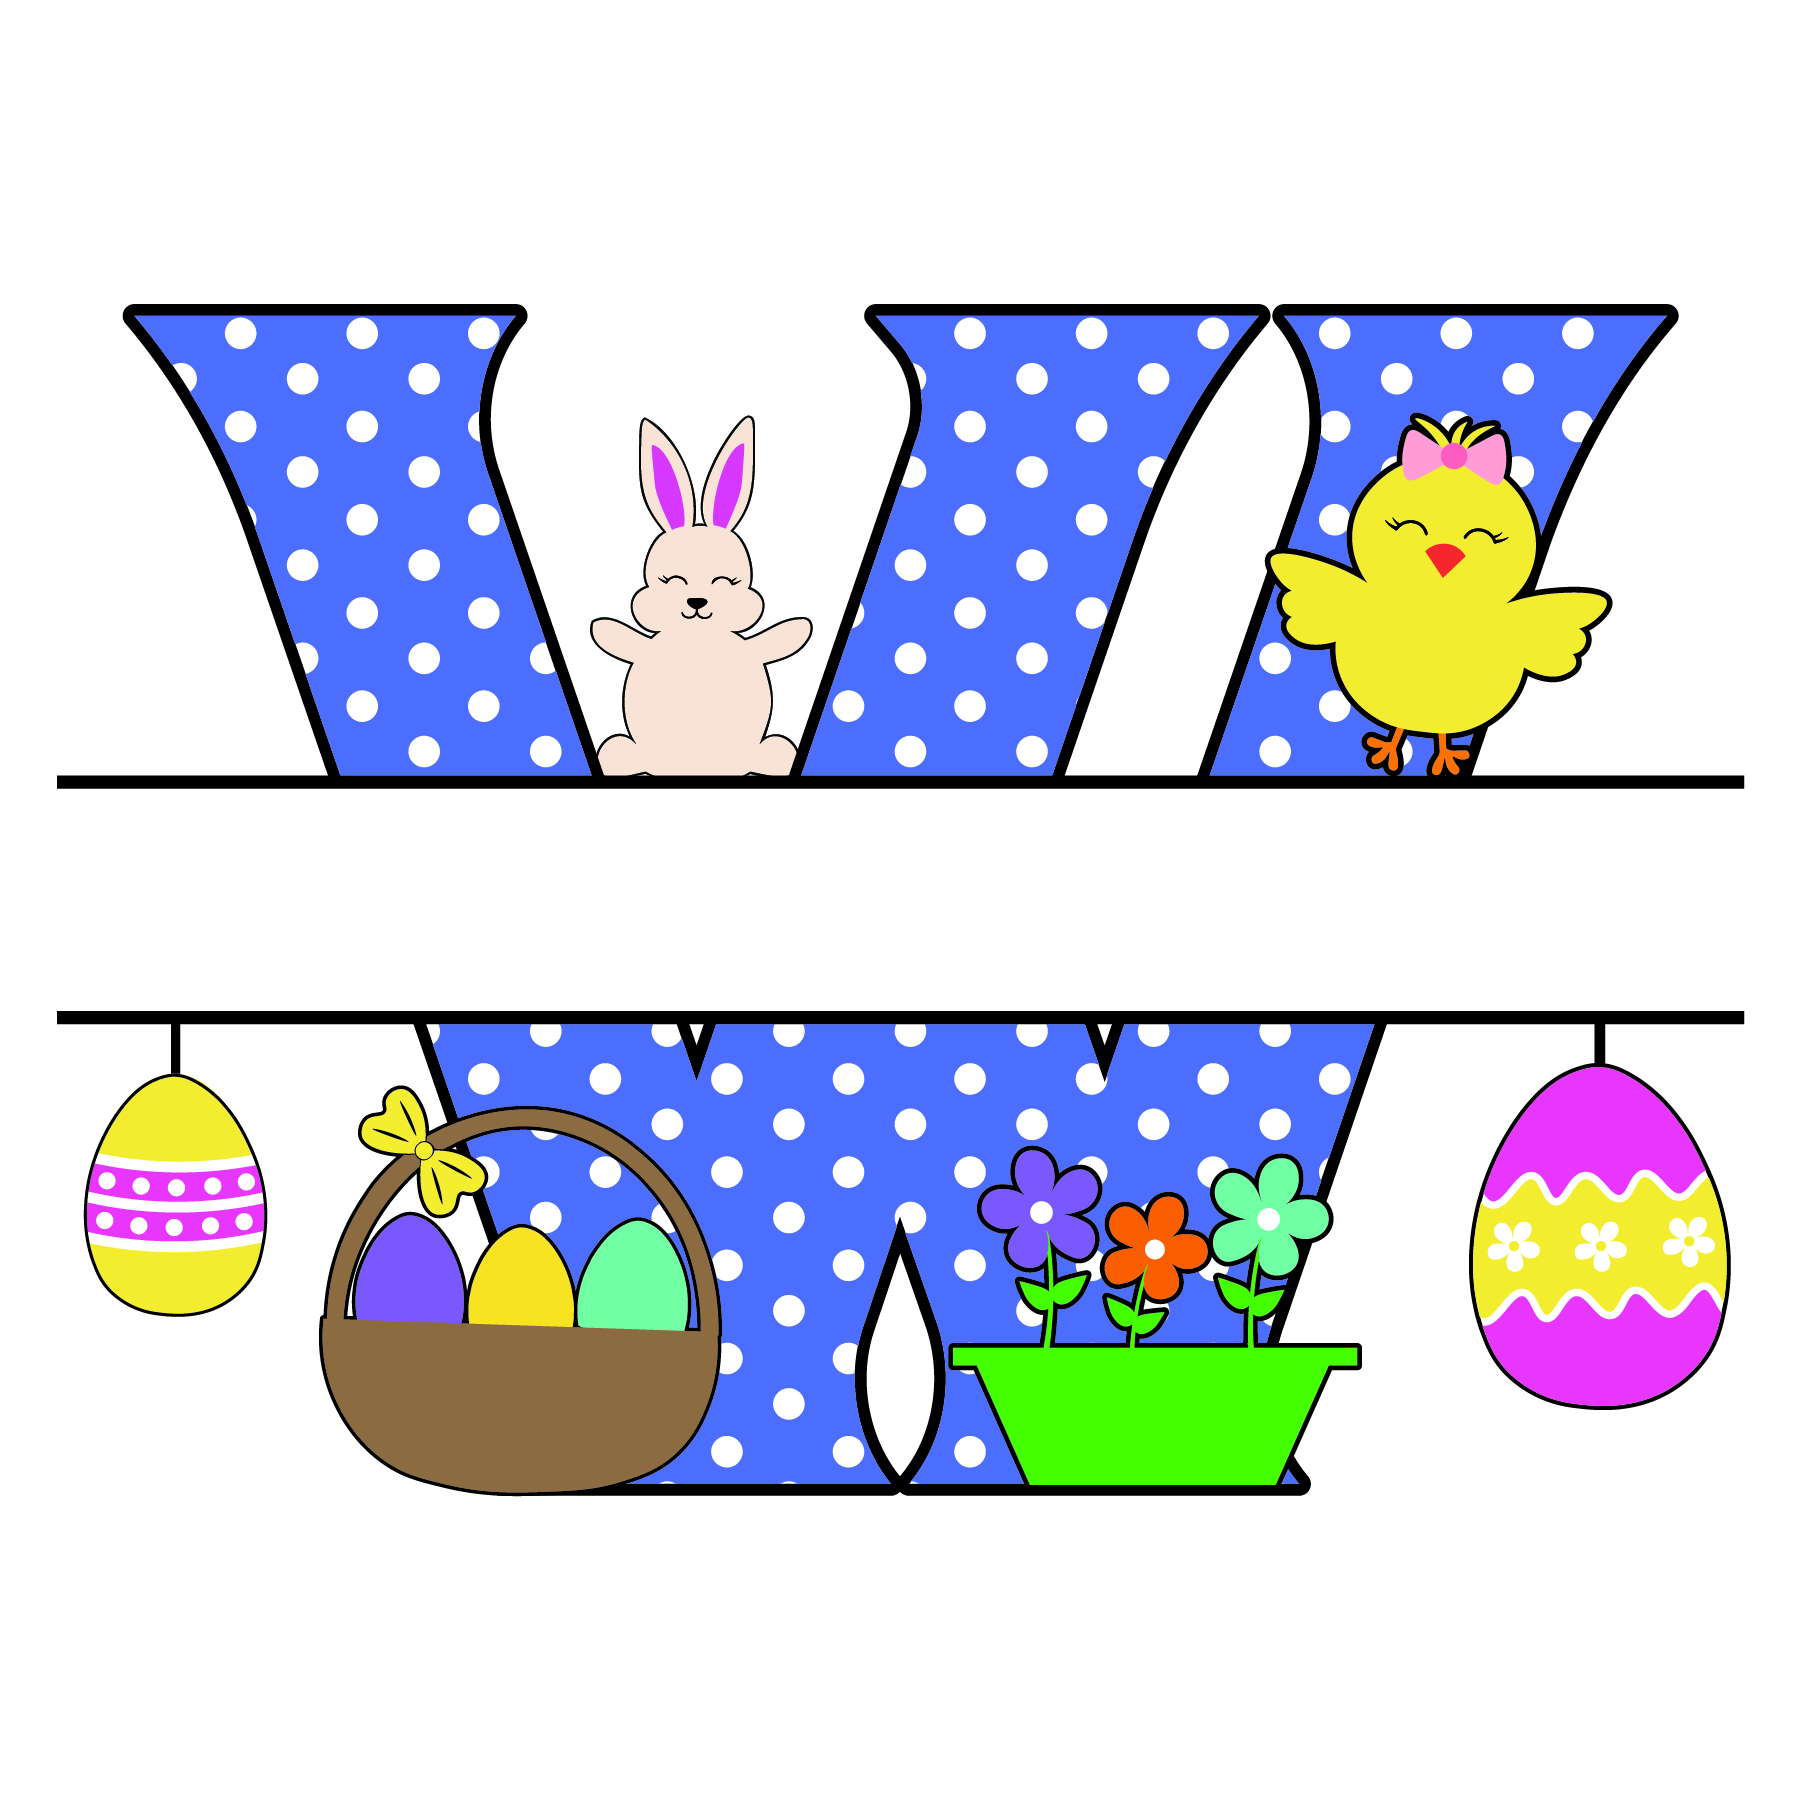 w letter free easter monogram bunny egg basket chicken clipart alphabet letter split customize or personalize stencil template to print or download vector svg laser vinyl circuit silhouette.